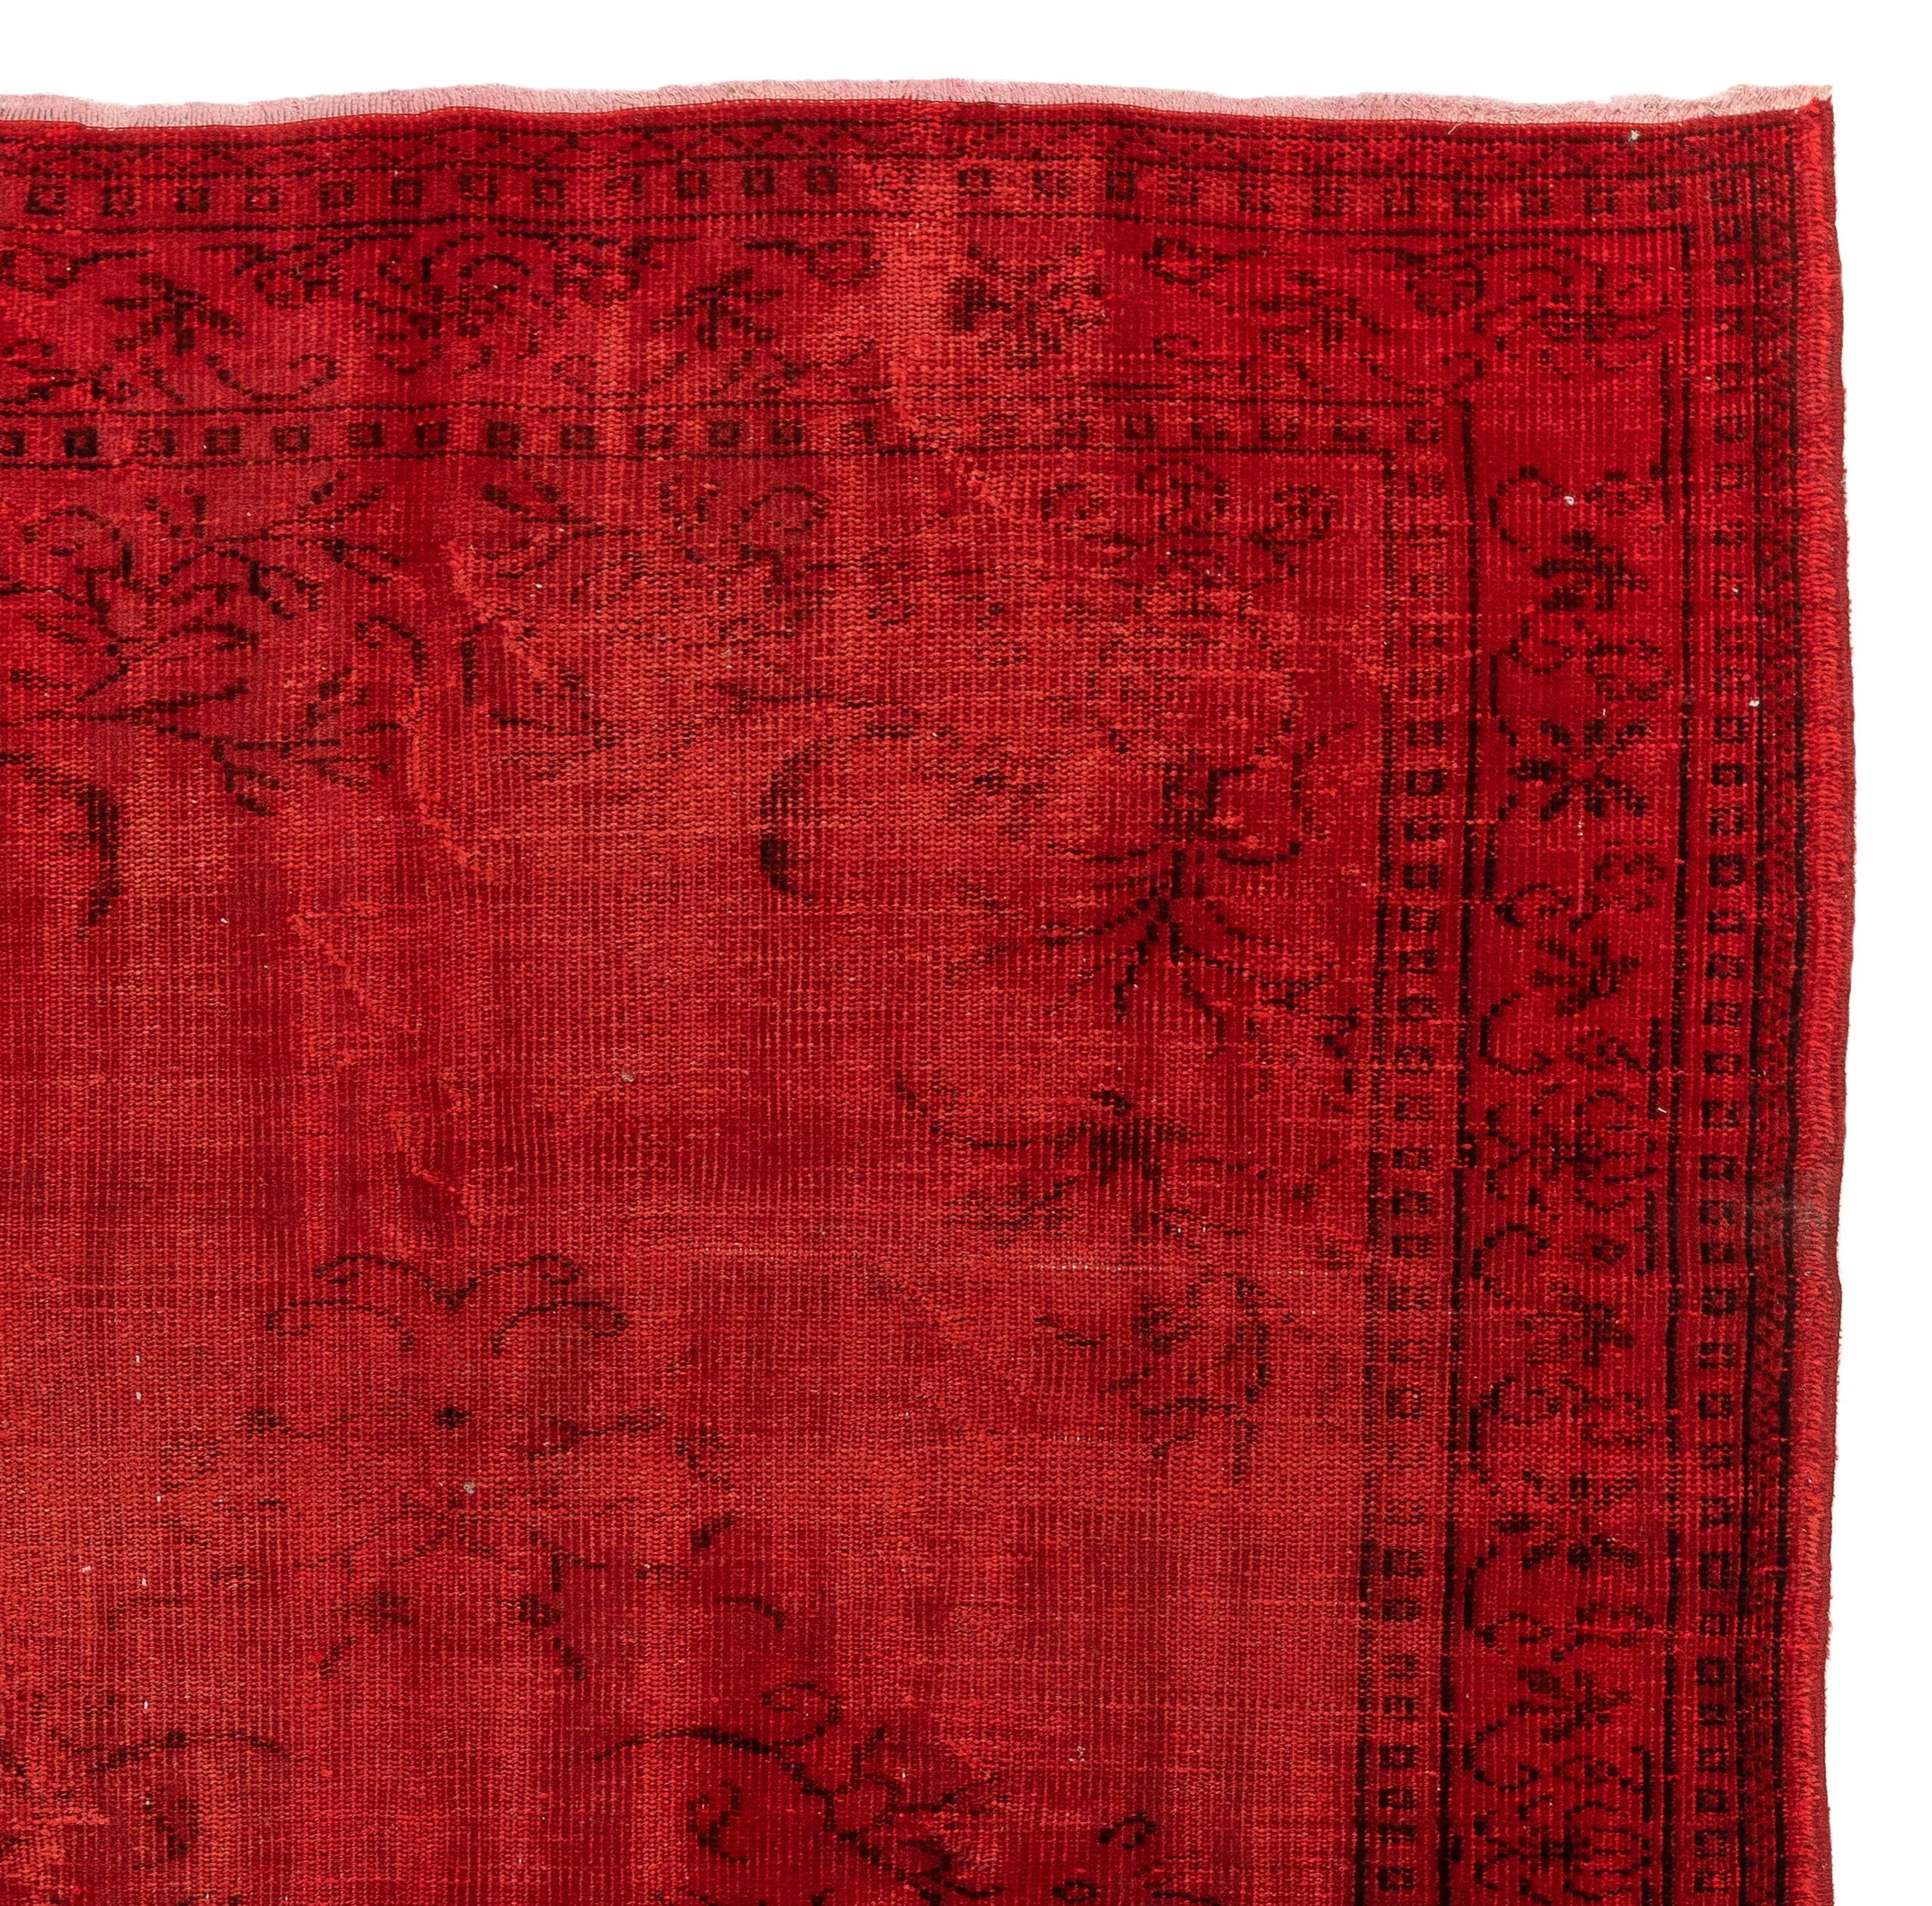 Hand-Woven 5.8 x 8.8 Ft Vintage Rug Overdyed in Red. Great for Modern Home & Office Decor